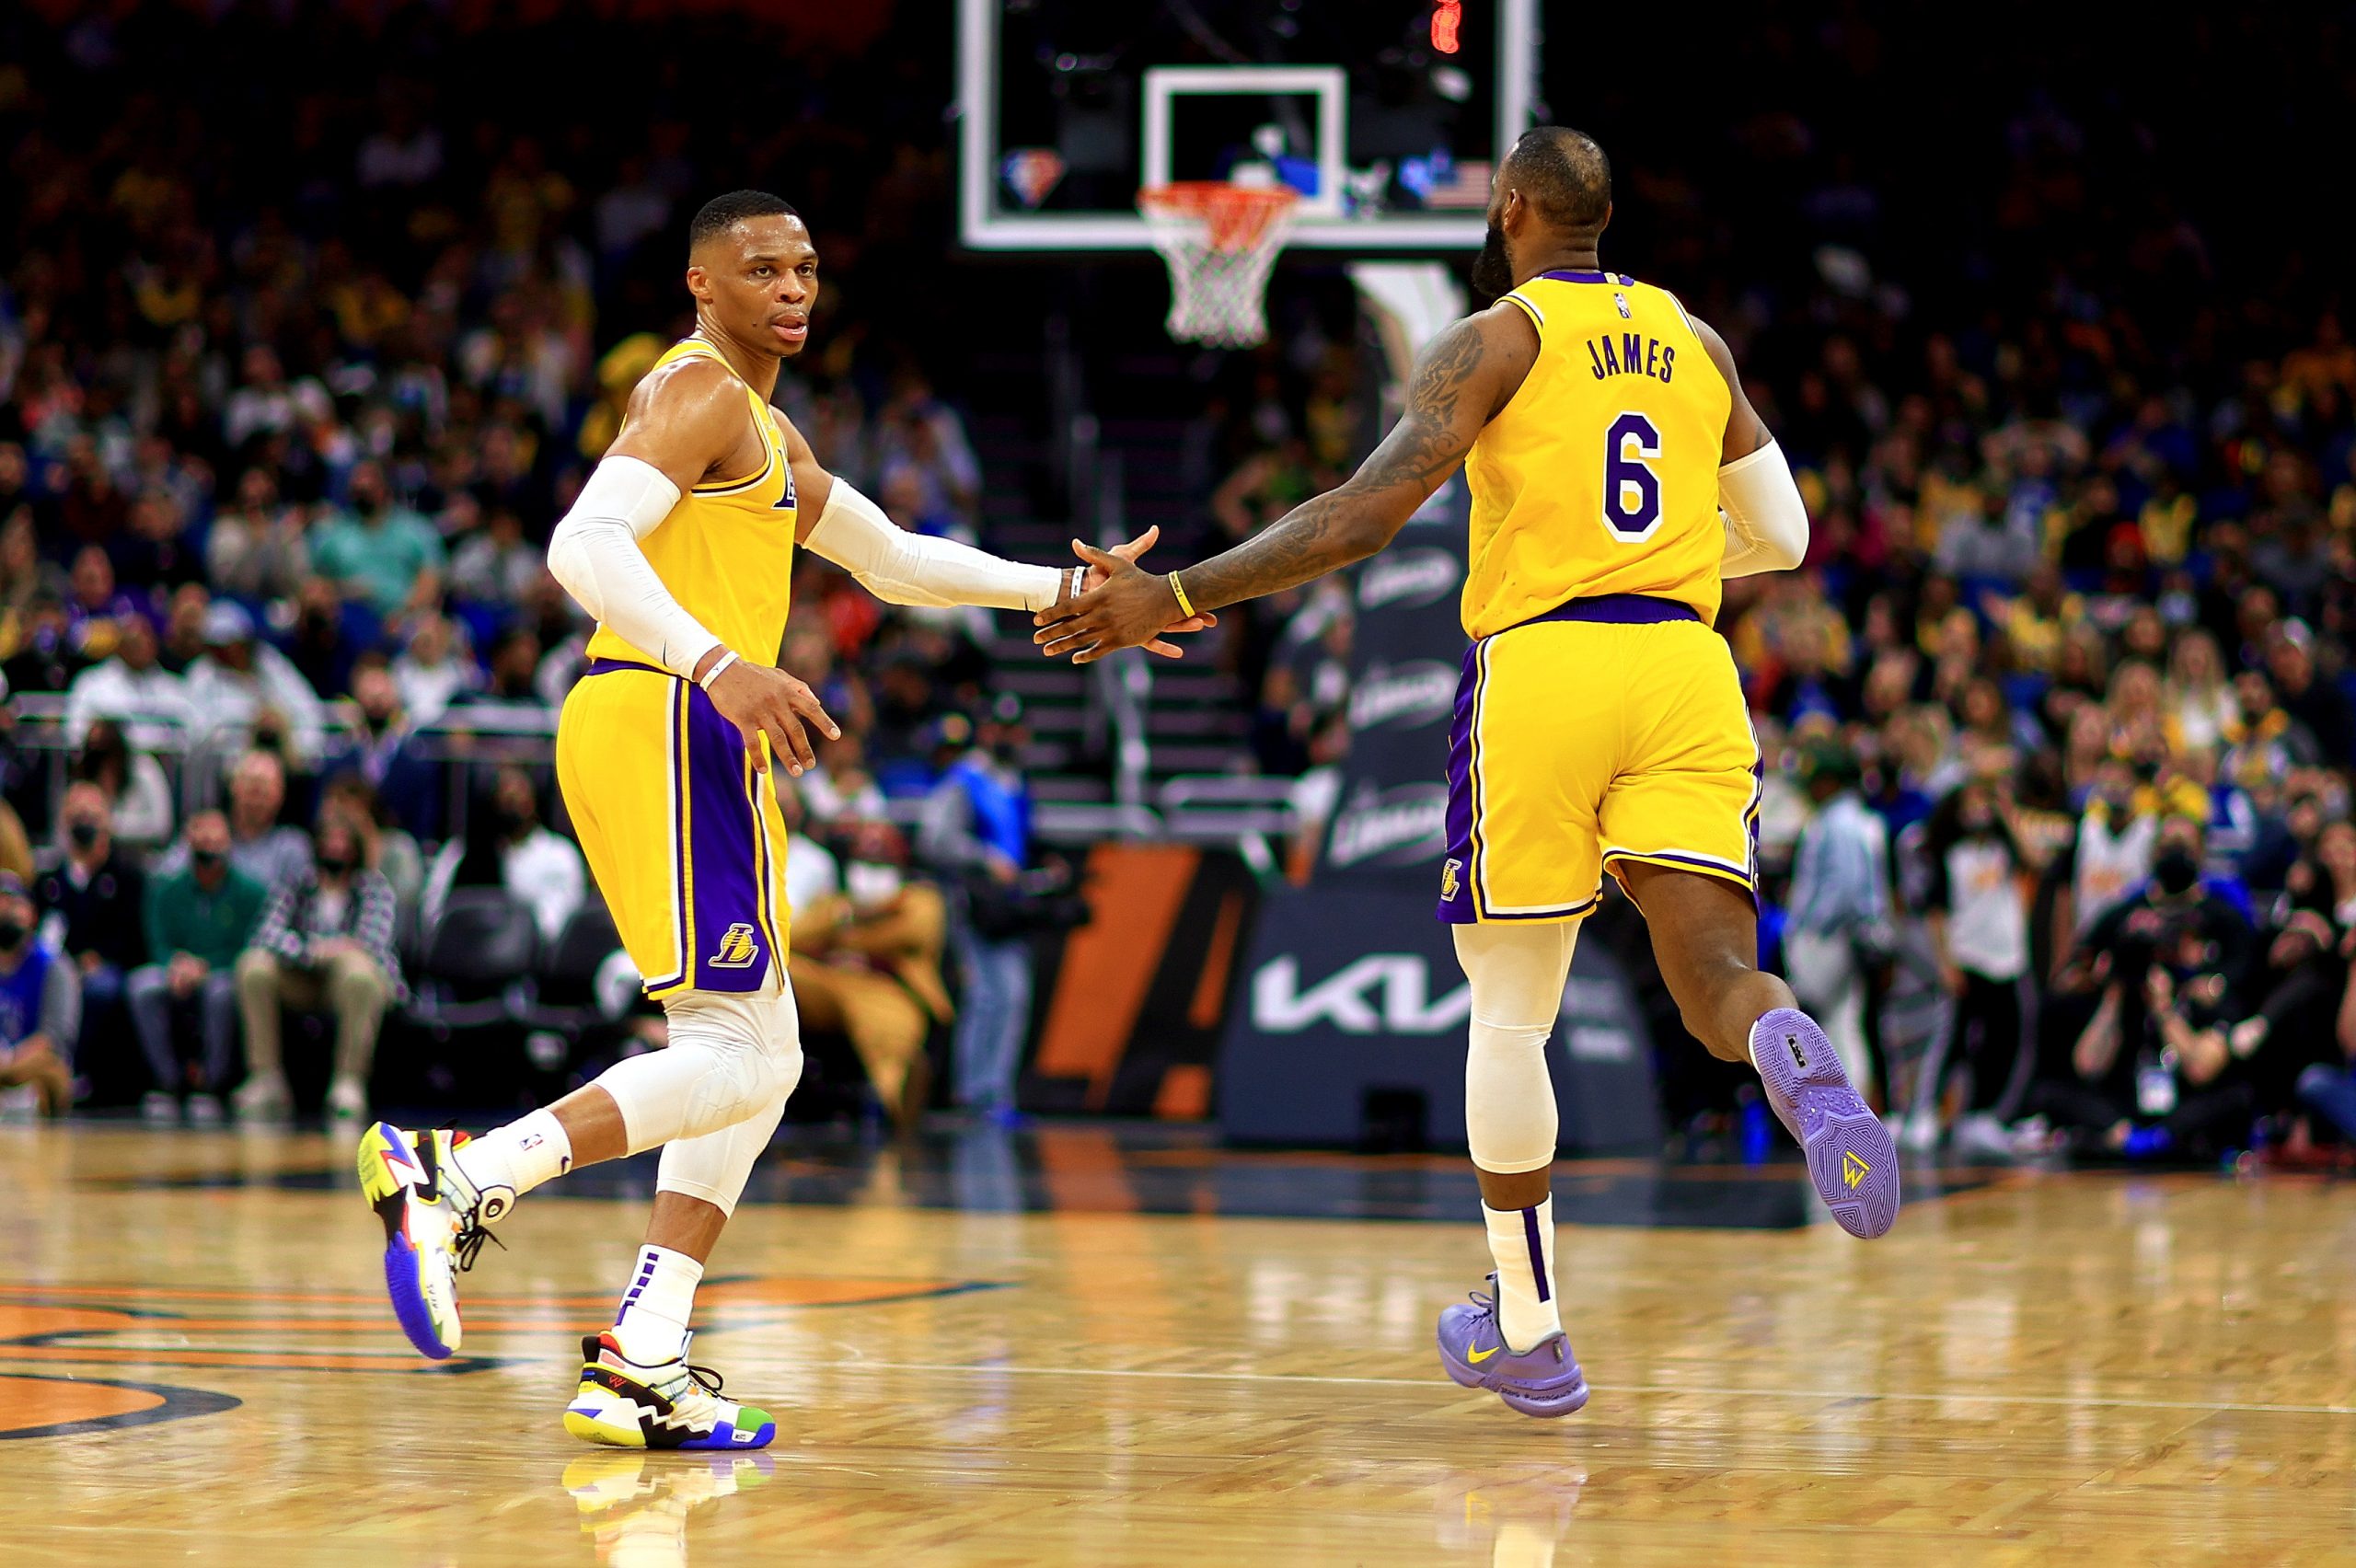 Los Angeles Lakers stars Russell Westbrook and LeBron James celebrated during a win over the Orlando Magic on Jan. 21 in Orlando.